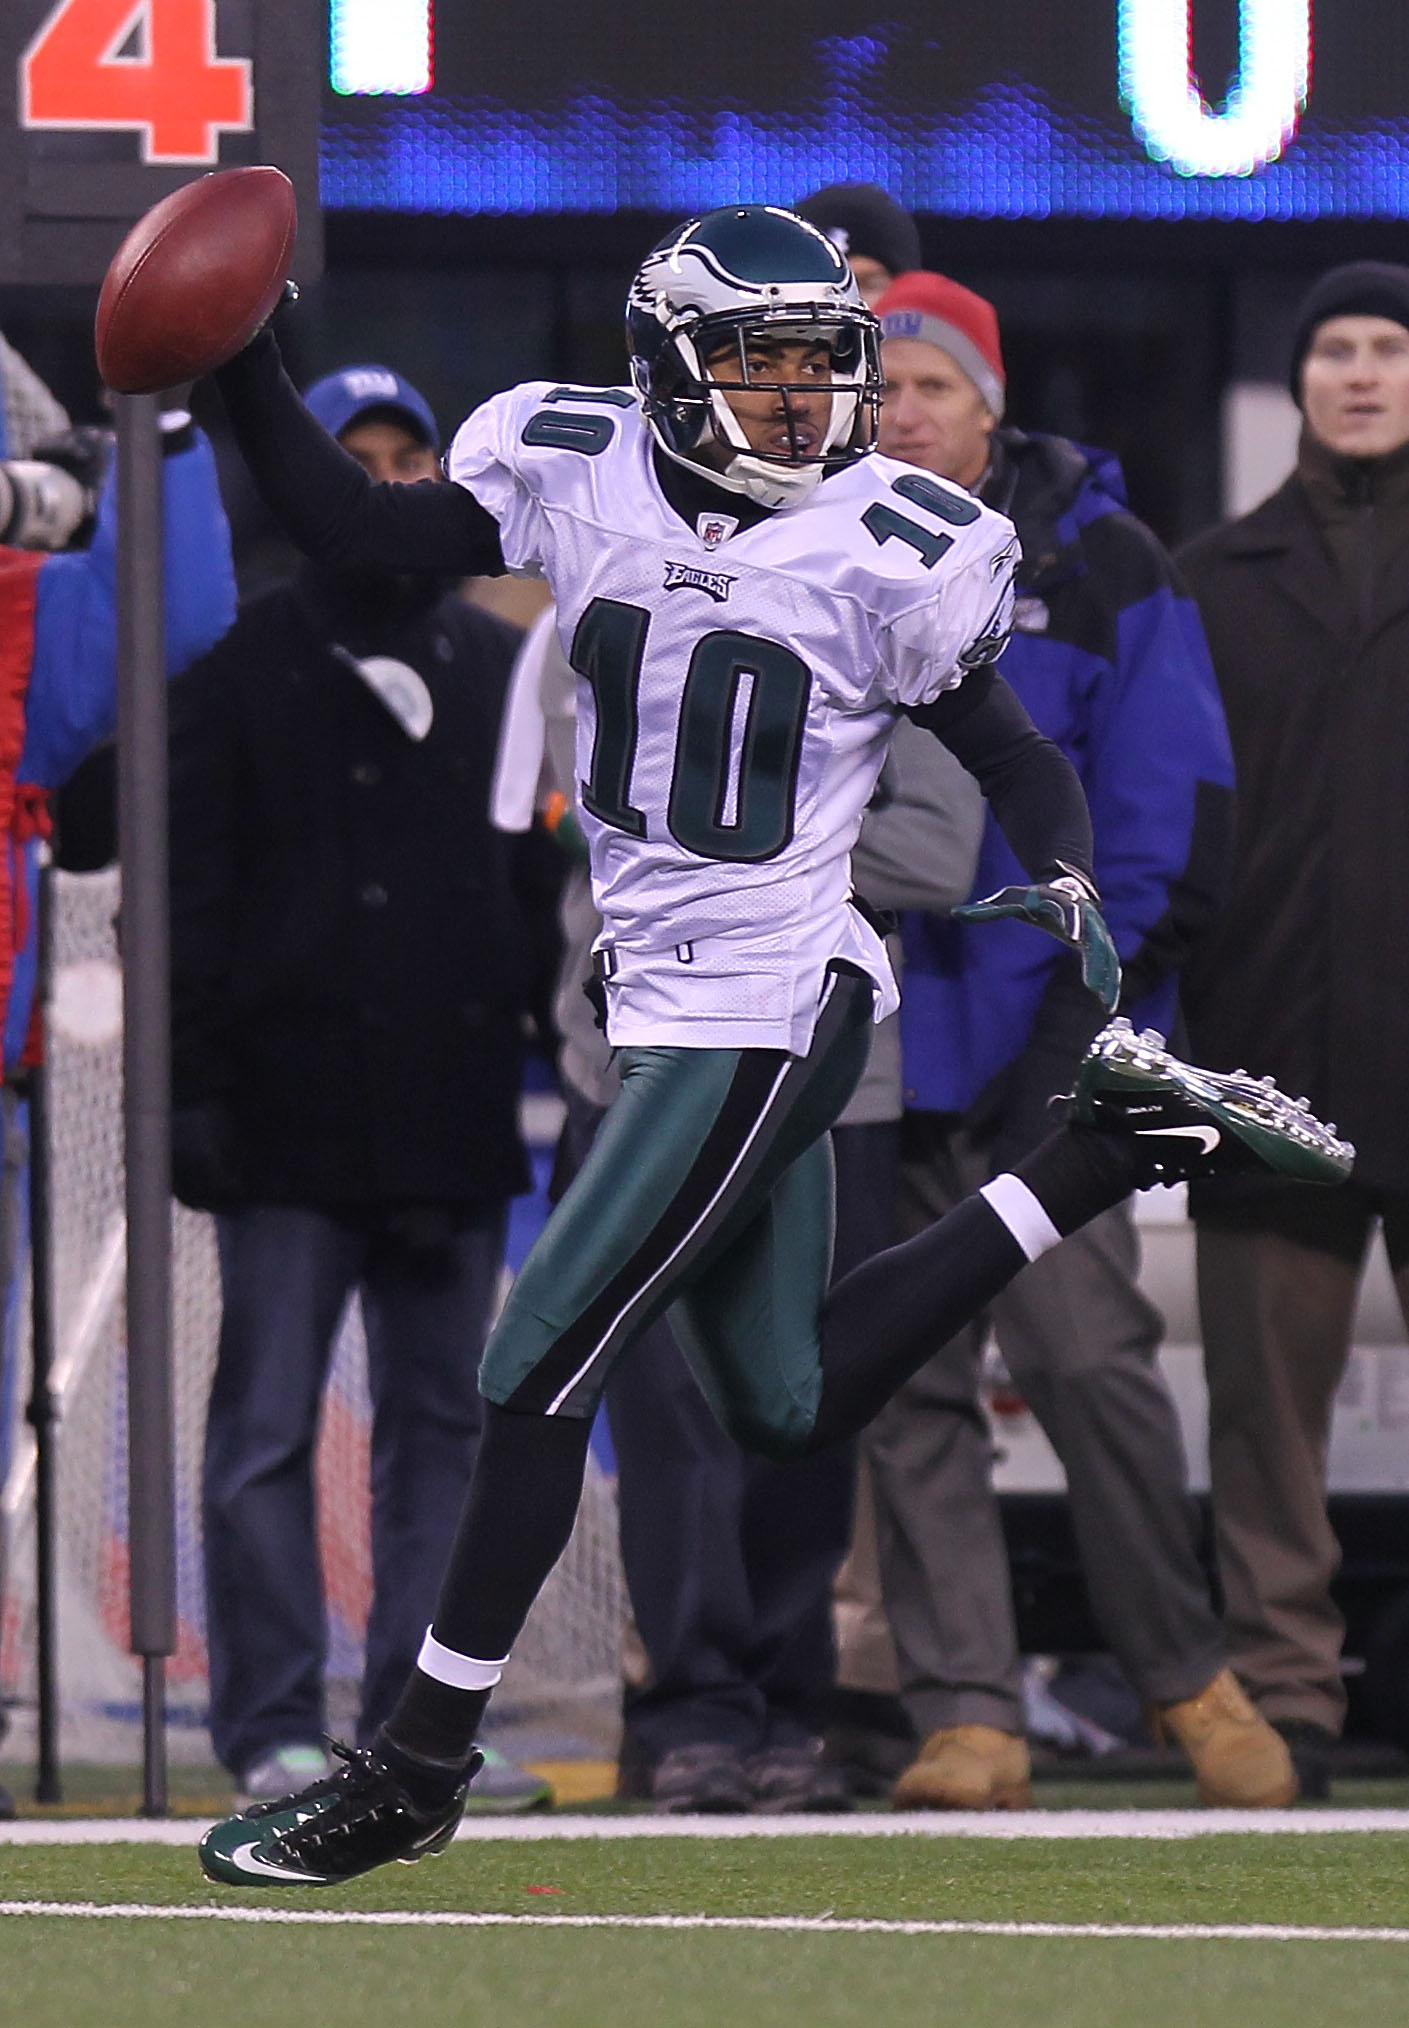 EAST RUTHERFORD, NJ - DECEMBER 19:  DeSean Jackson #10 of the Philadelphia Eagles runs in the game winning touchdown on a punt return against the New York Giants at New Meadowlands Stadium on December 19, 2010 in East Rutherford, New Jersey.  (Photo by Ni